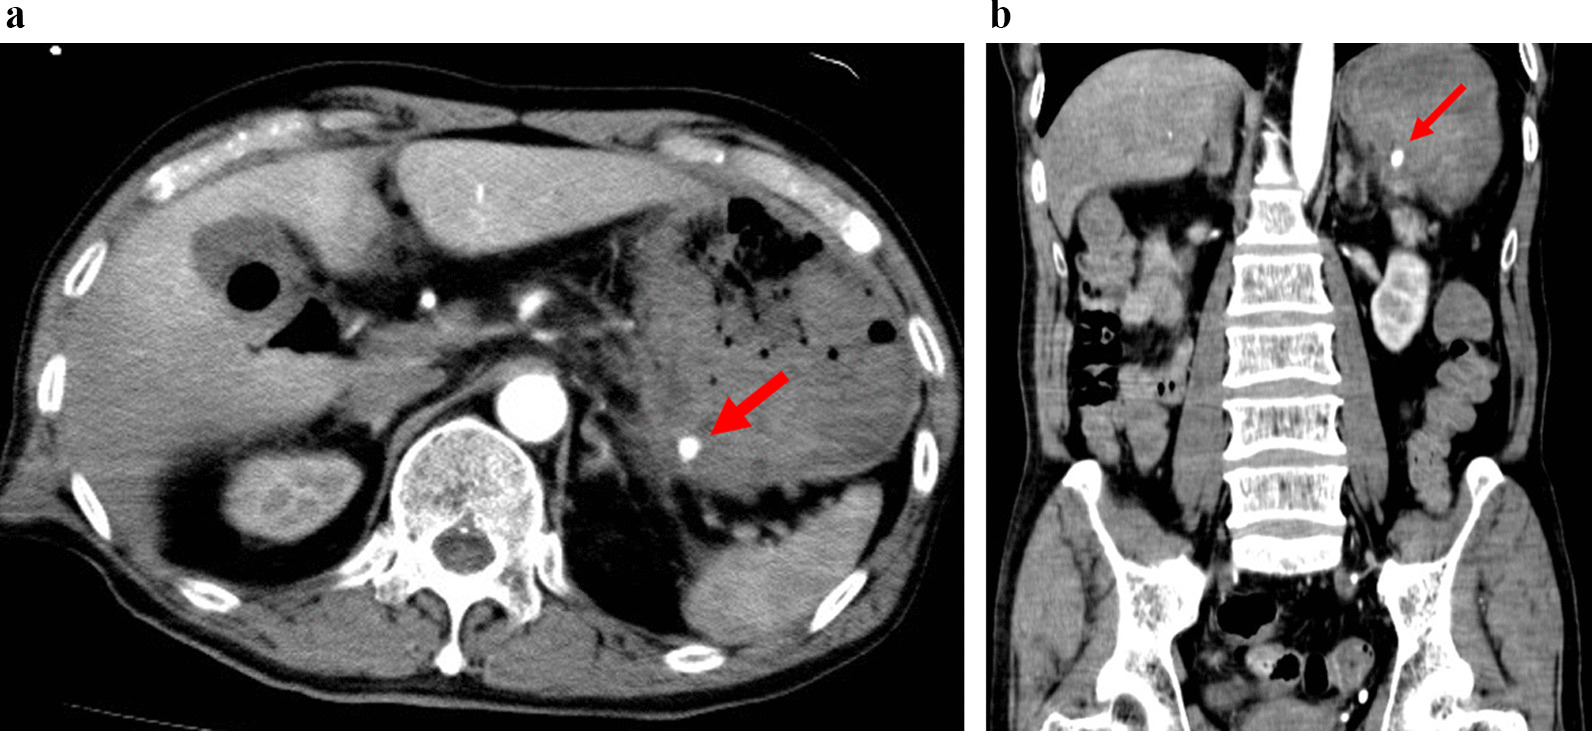 Gastric rupture caused by intragastric perforation of splenic artery aneurysm: a case report and literature review